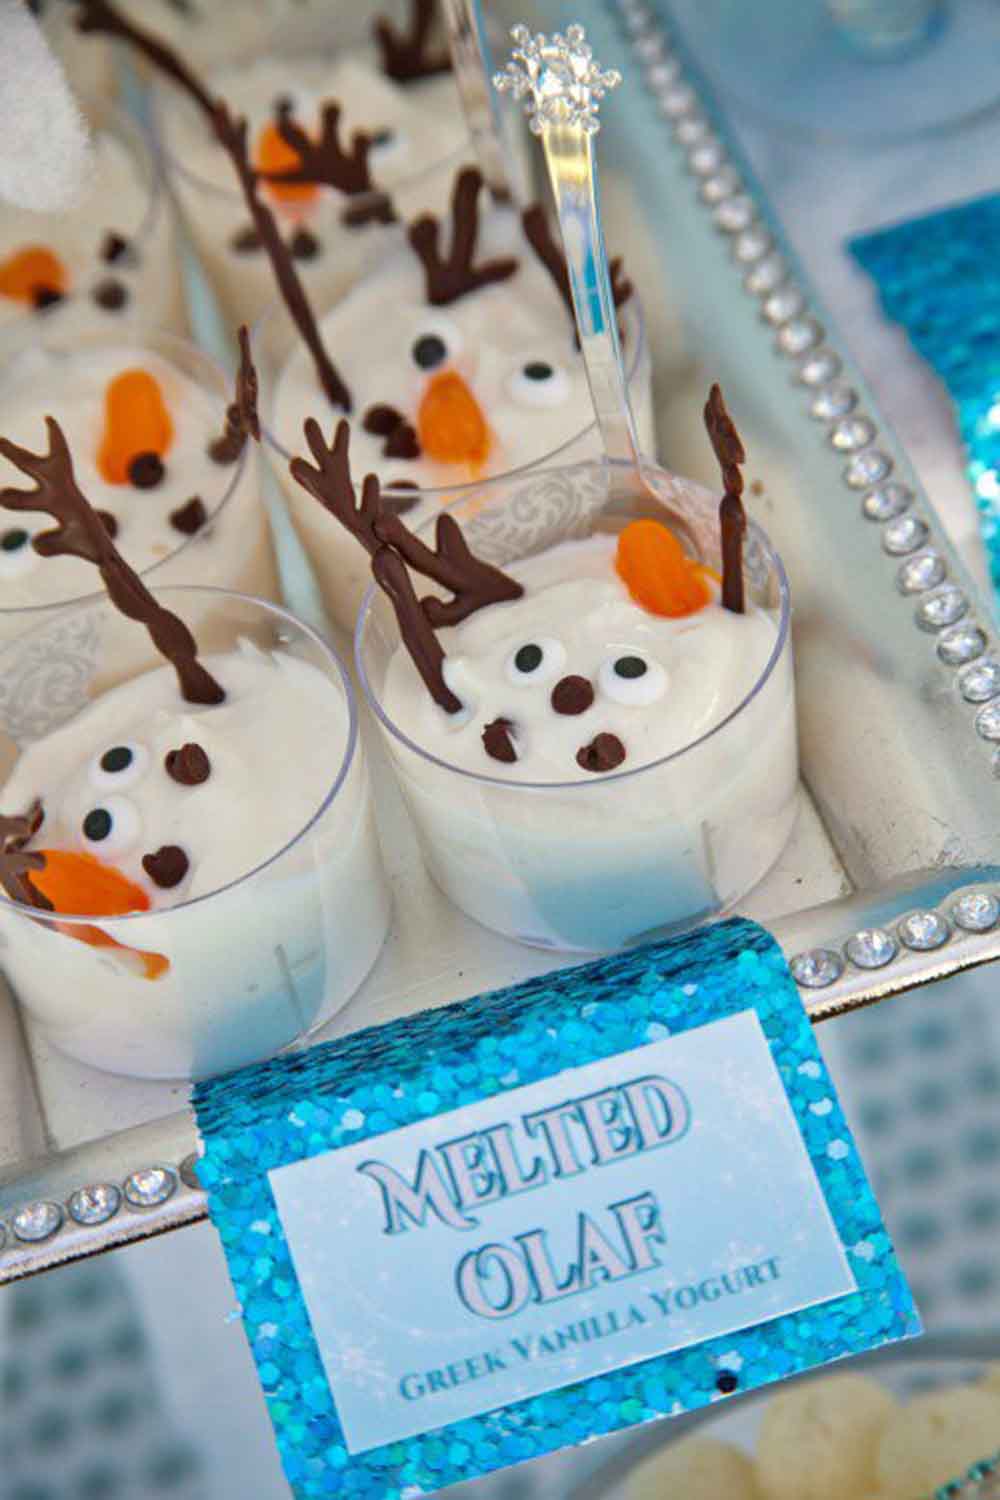 disney princess party food melted olaf pudding